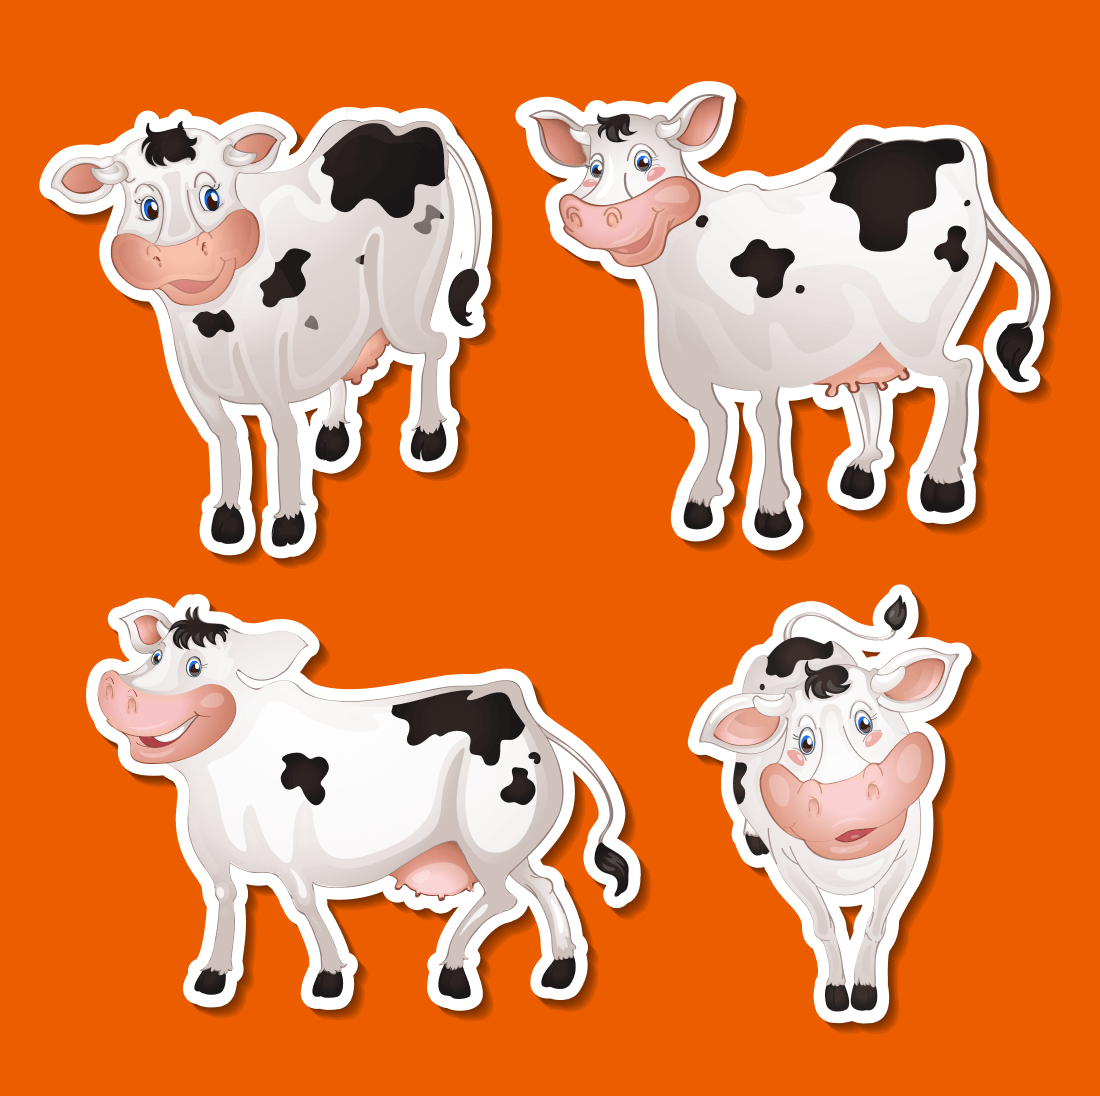 Four cheerful cows with kind eyes and funny bangs.